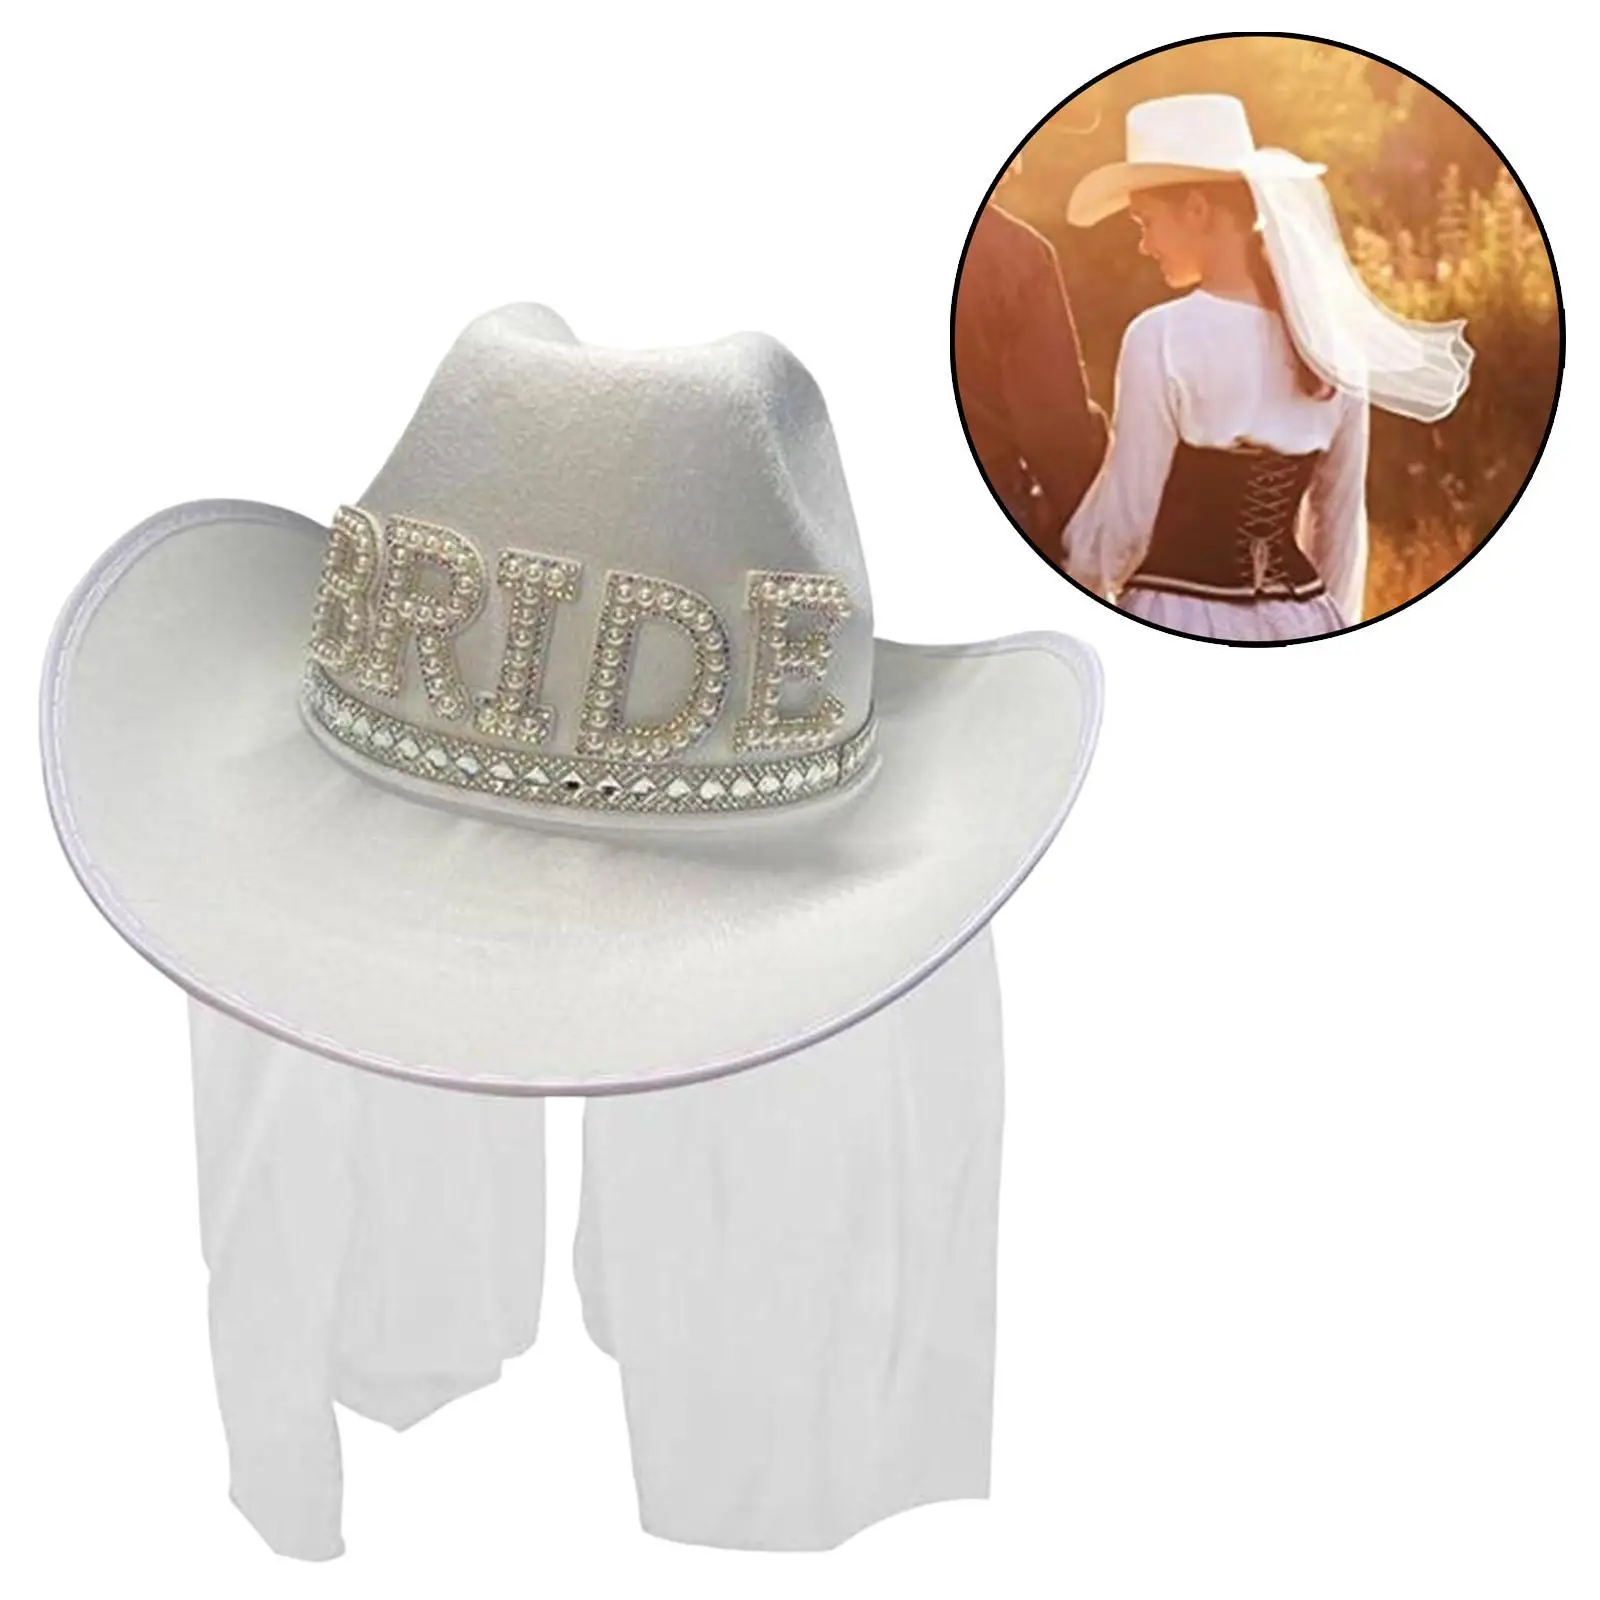 Wild West Pearl Bride Veil Cowboy Cowgirl Hat Costume Clothes White Dress up Sun Hats for Engagement Party Pretend Play Cocktail